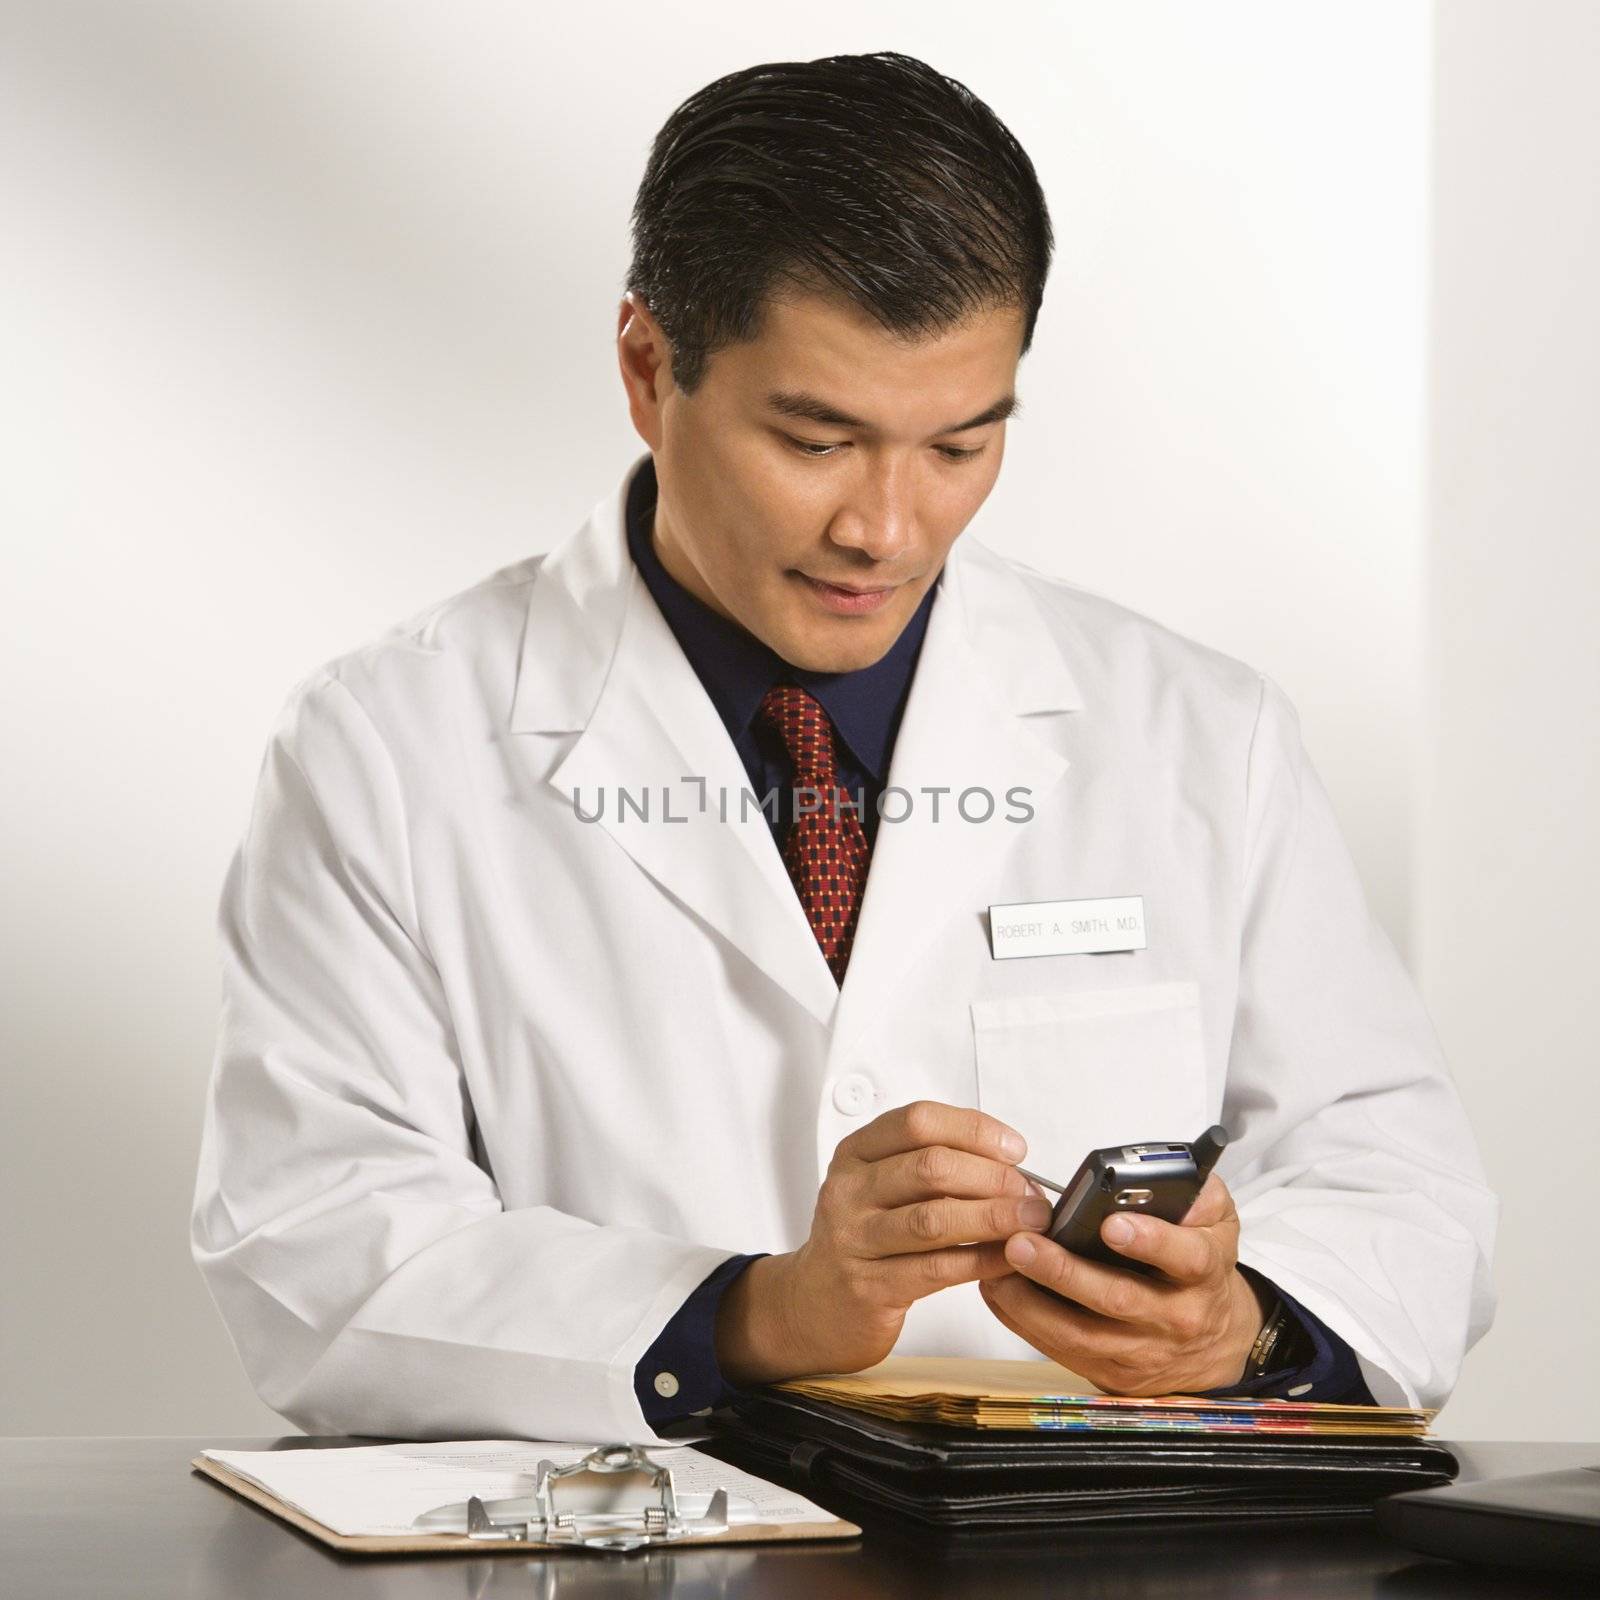 Asian American male doctor sitting at desk with charts using pda.